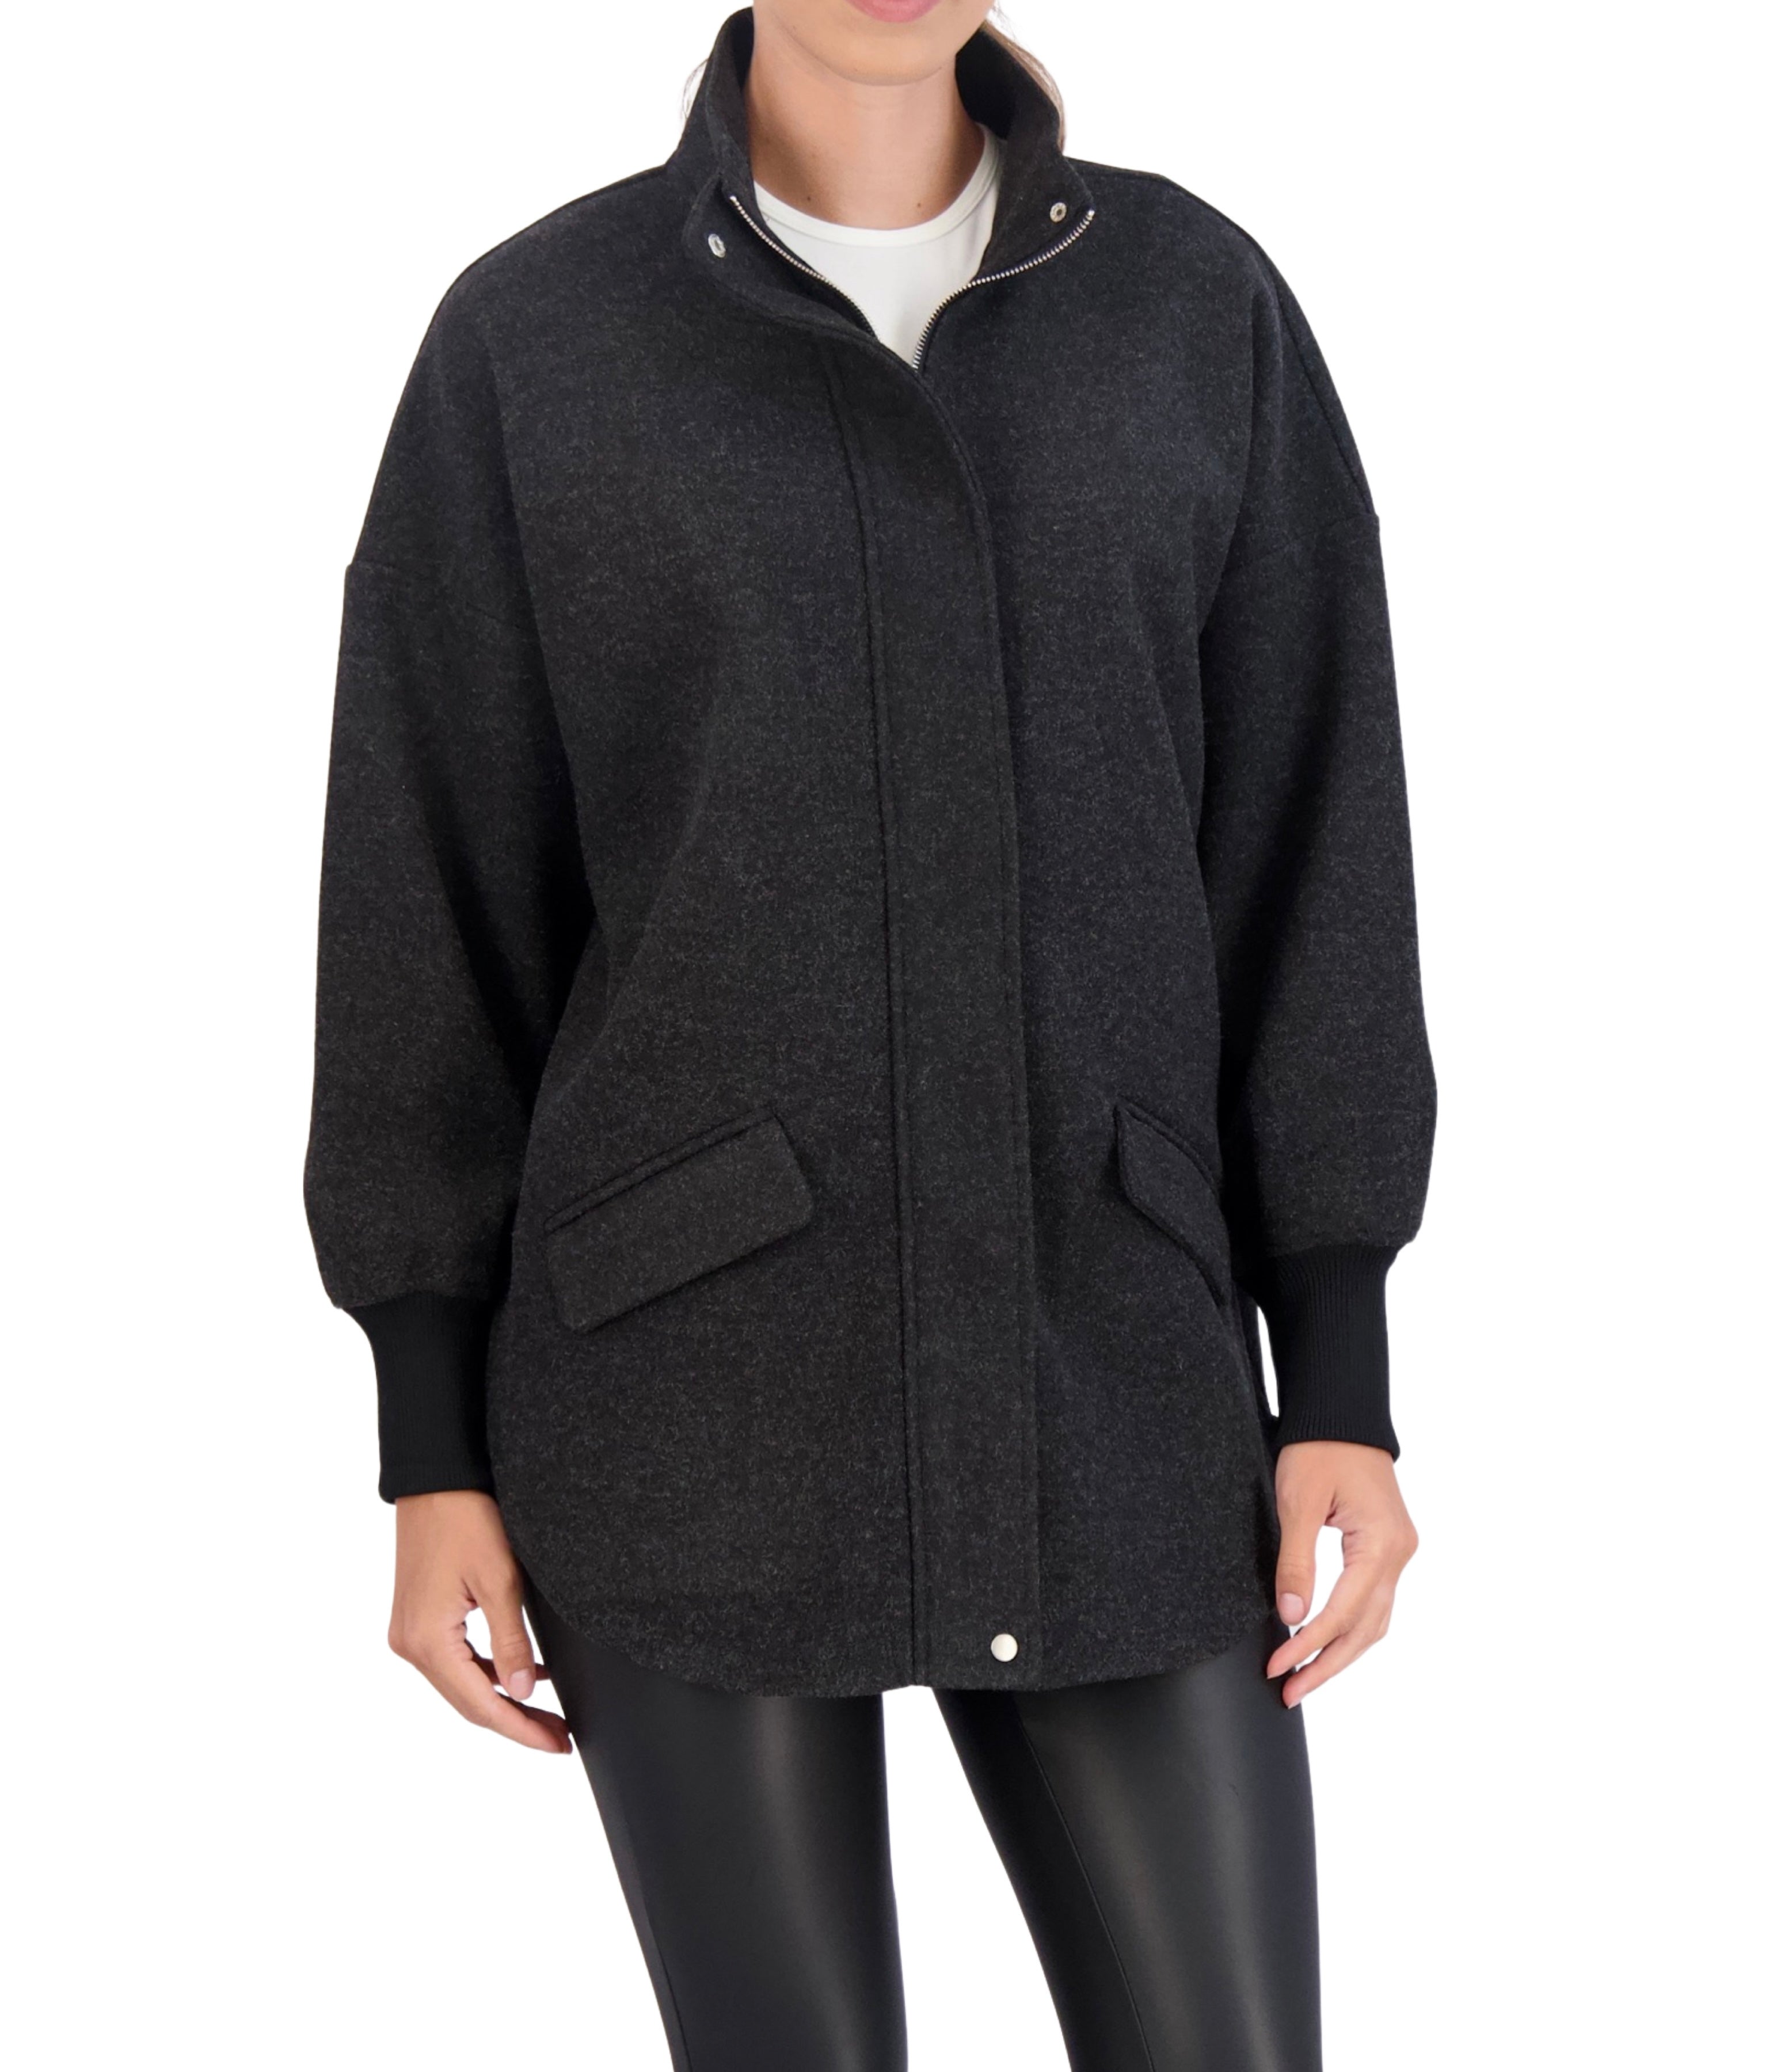 Unlined Vegan Cashmere Zip Jacket with Knit Cuffs